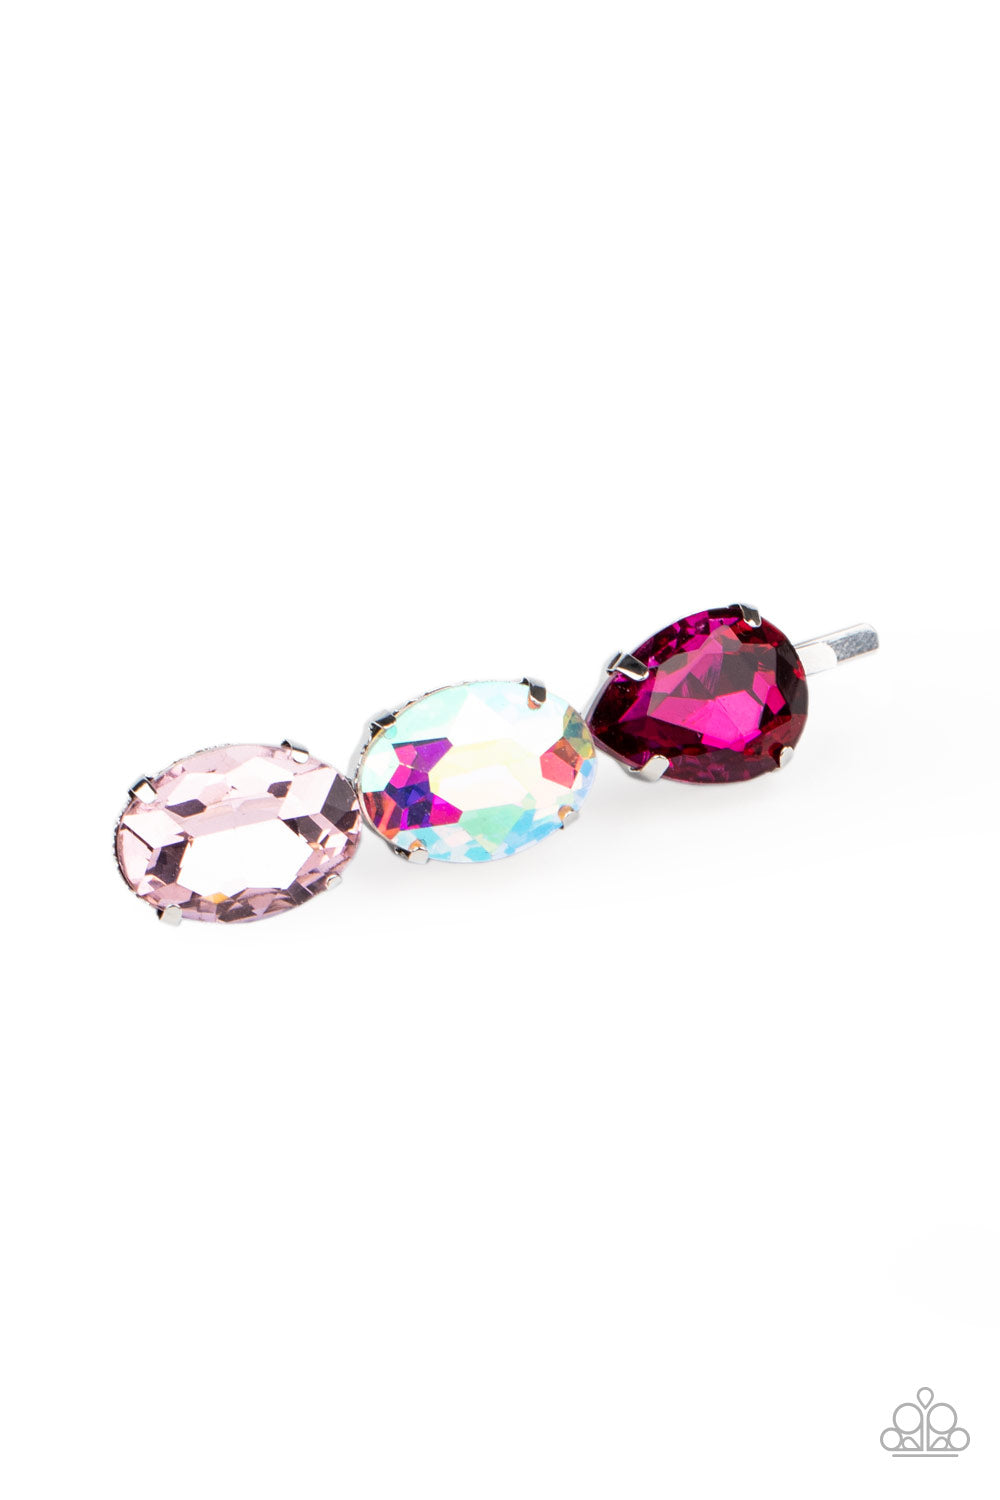 Paparazzi Accessories Beyond Bedazzled - Pink Hair Clips